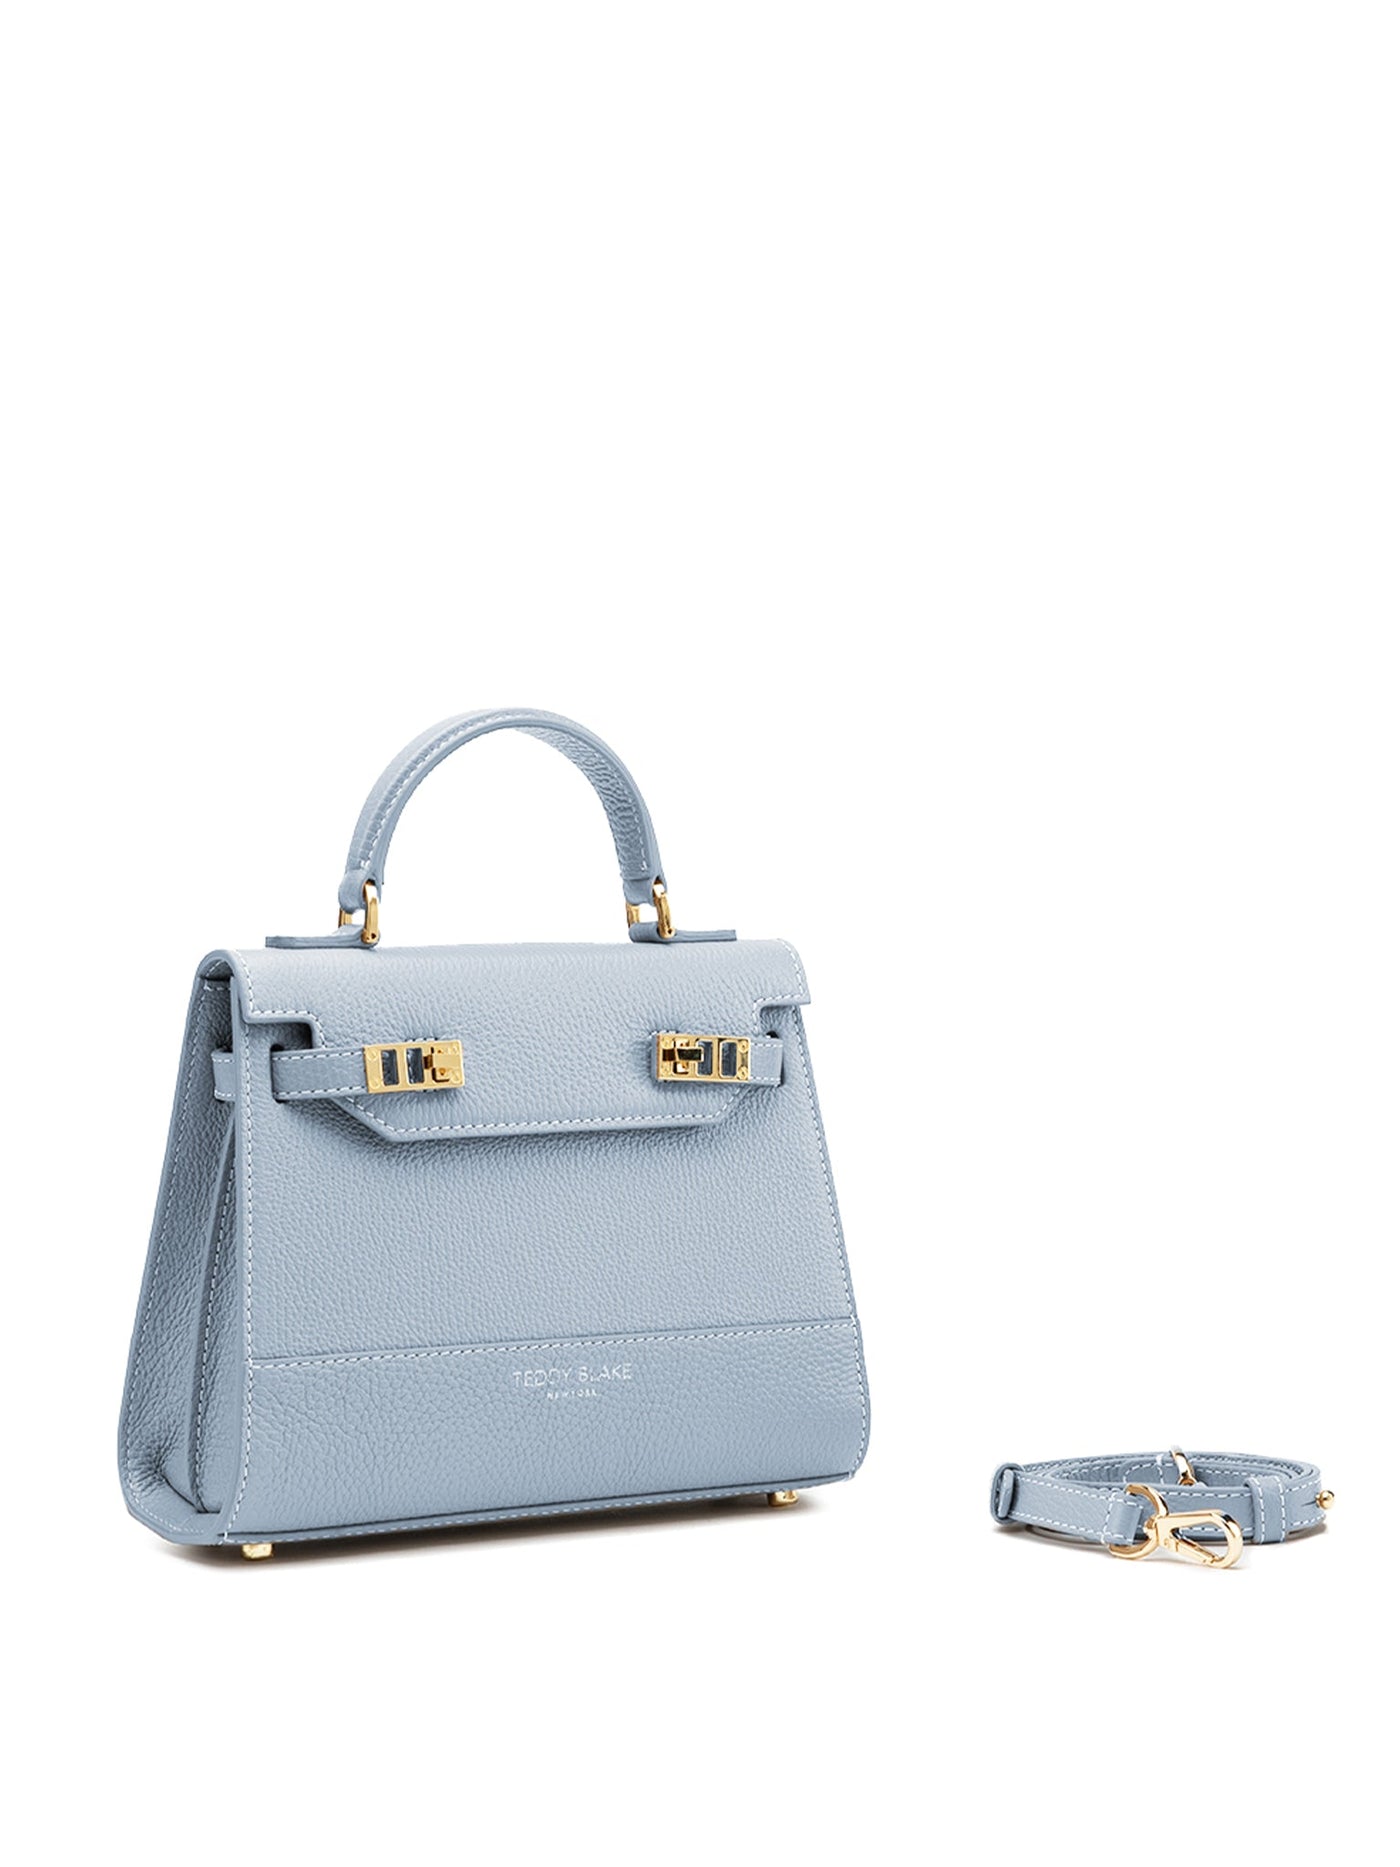 Hermes Kelly micro blue bag  Blue bag outfit, Blue handbag outfit, Blue  handbags